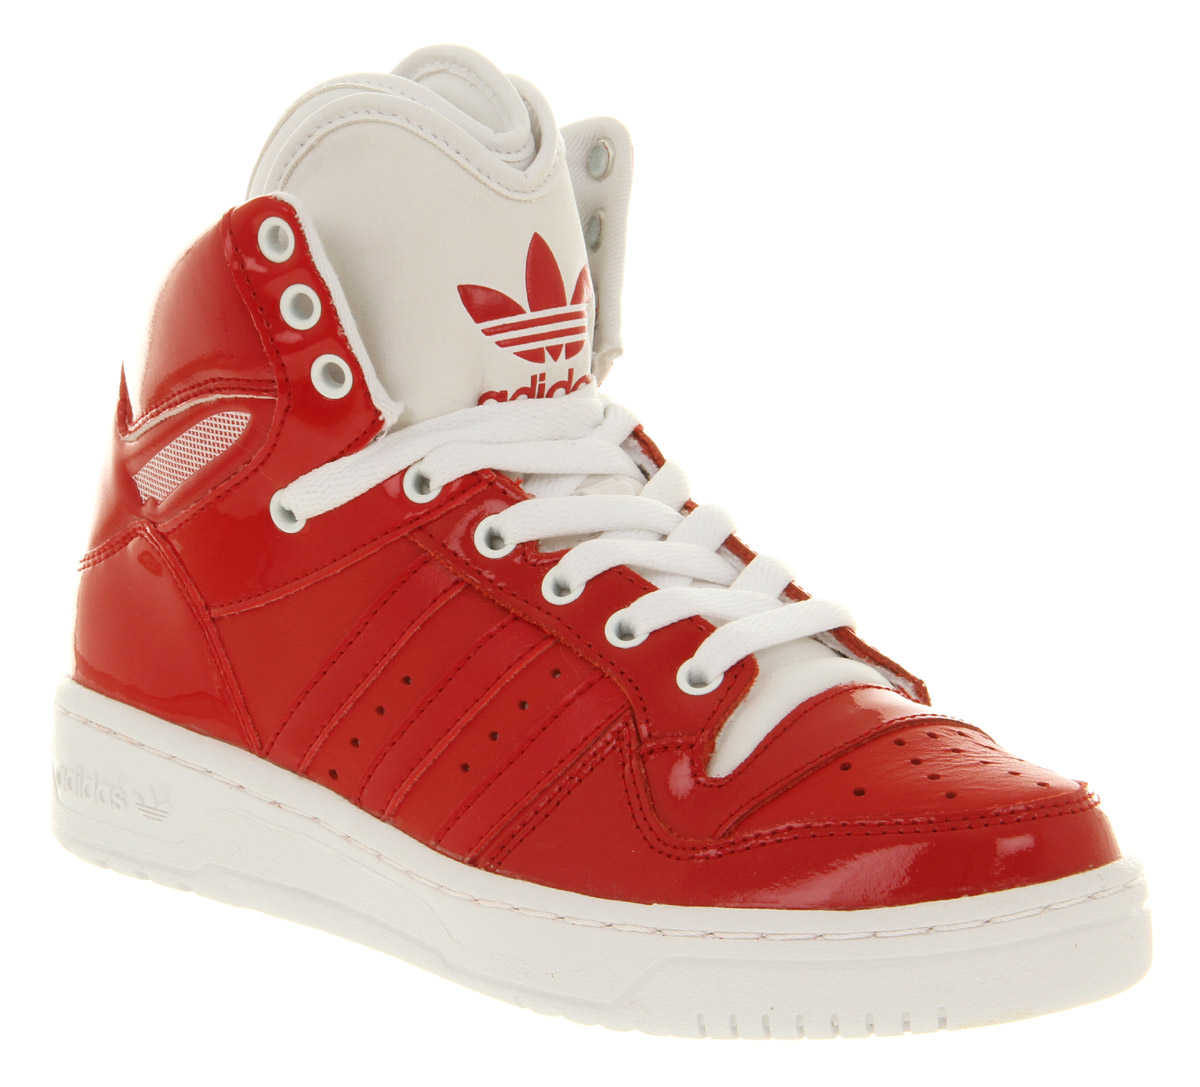 adidas shoes with red heart